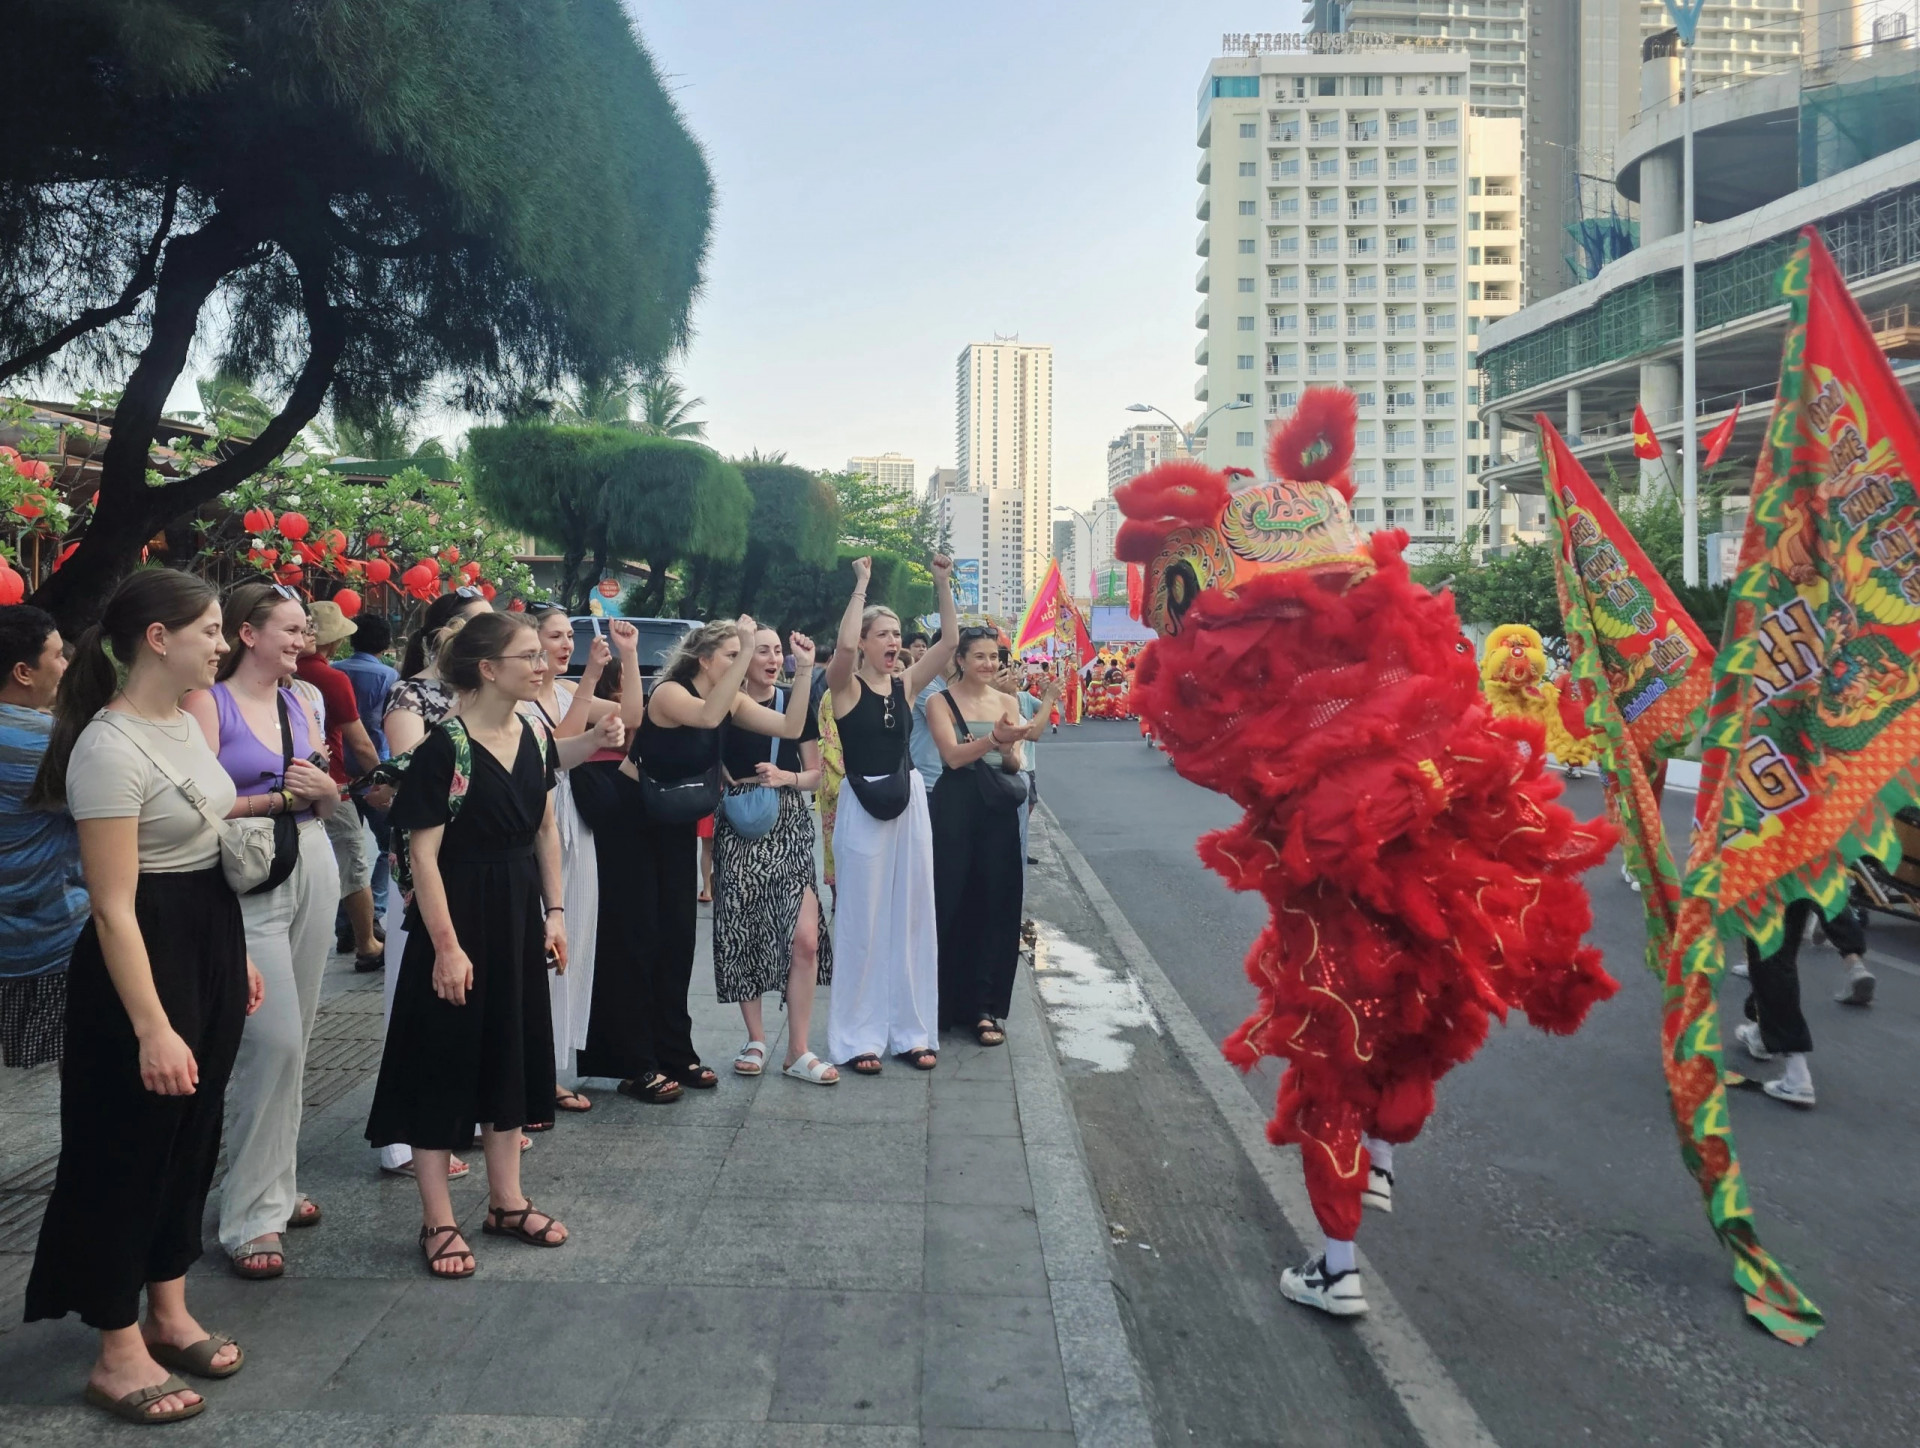 Tourists are excited with unicorn-lion-dragon performances (Photo: Thanh An)

